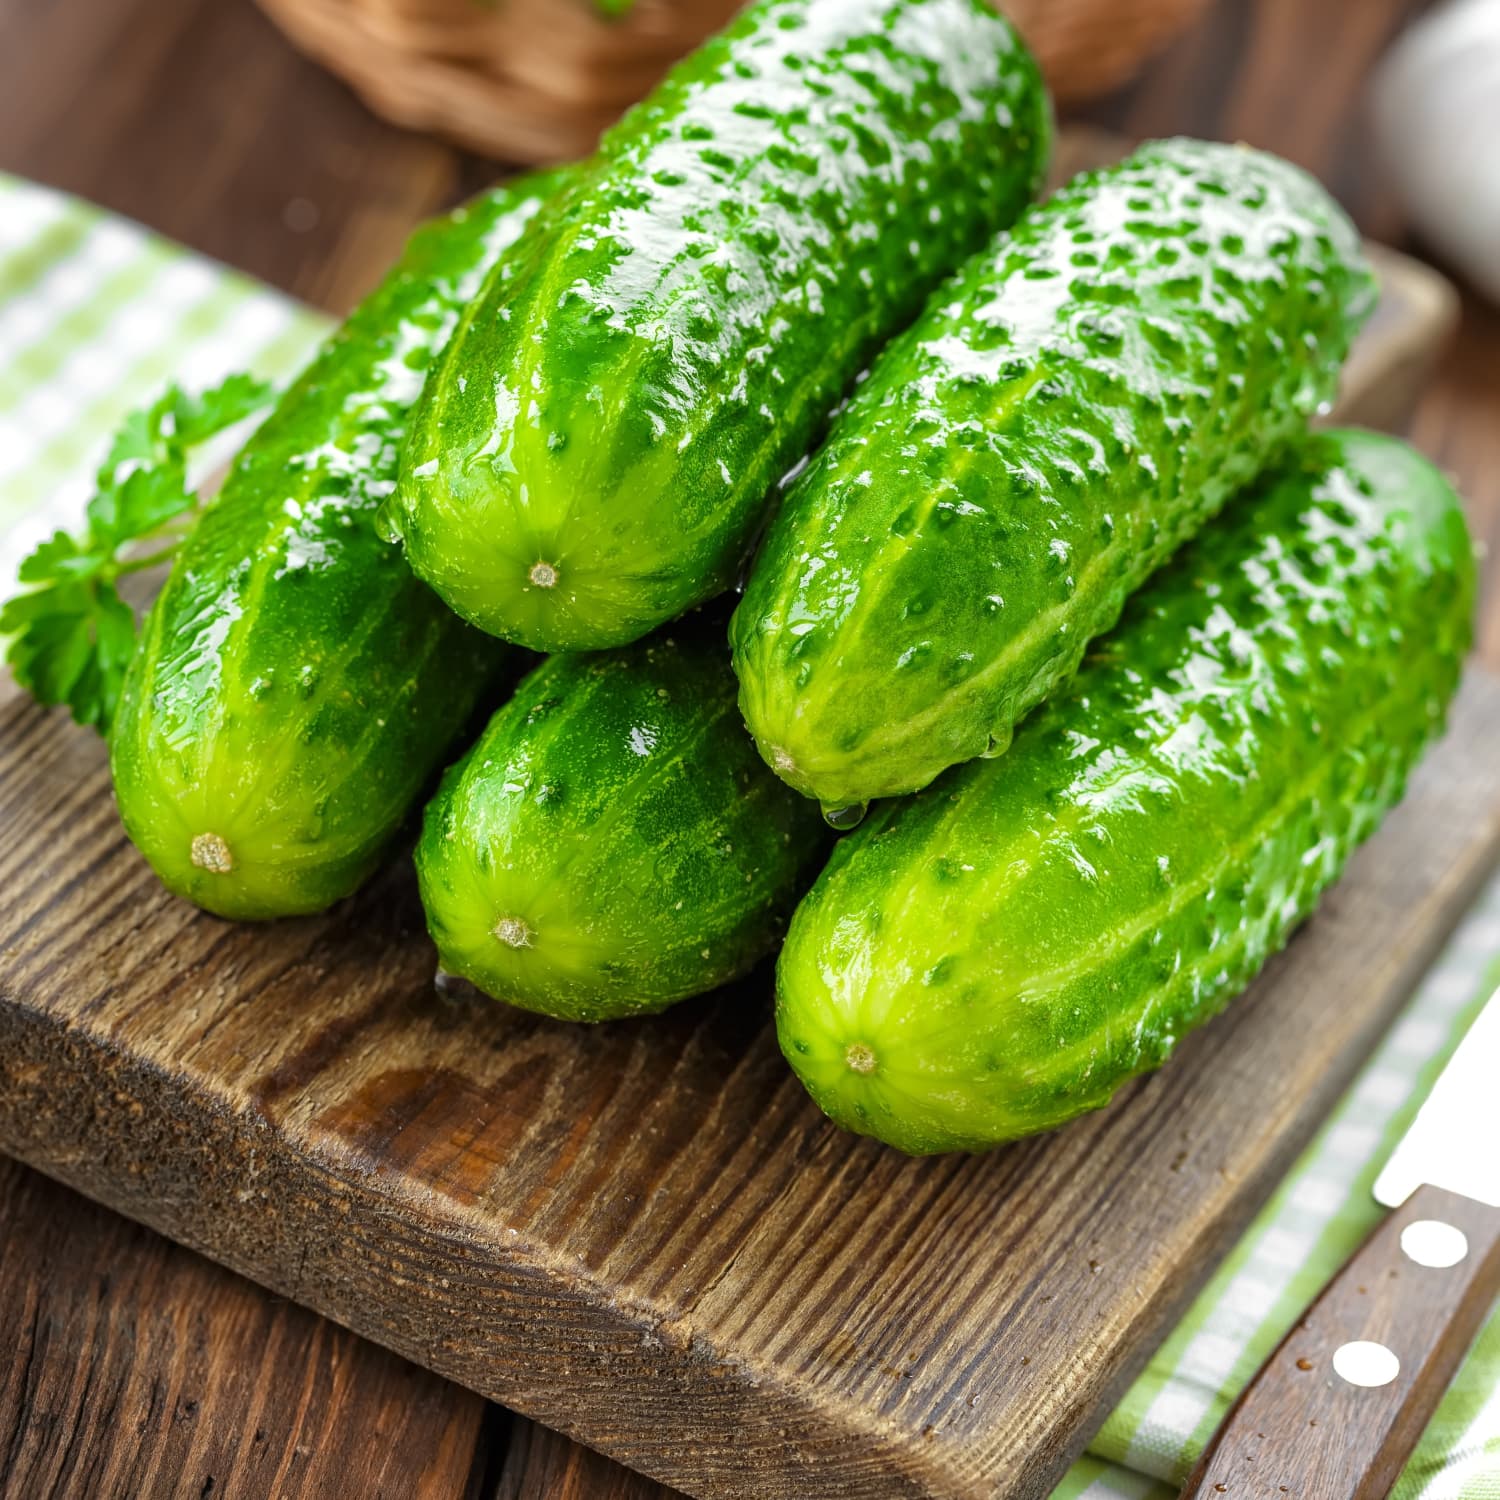 The Best Place for Storing Cucumbers | Kitchn